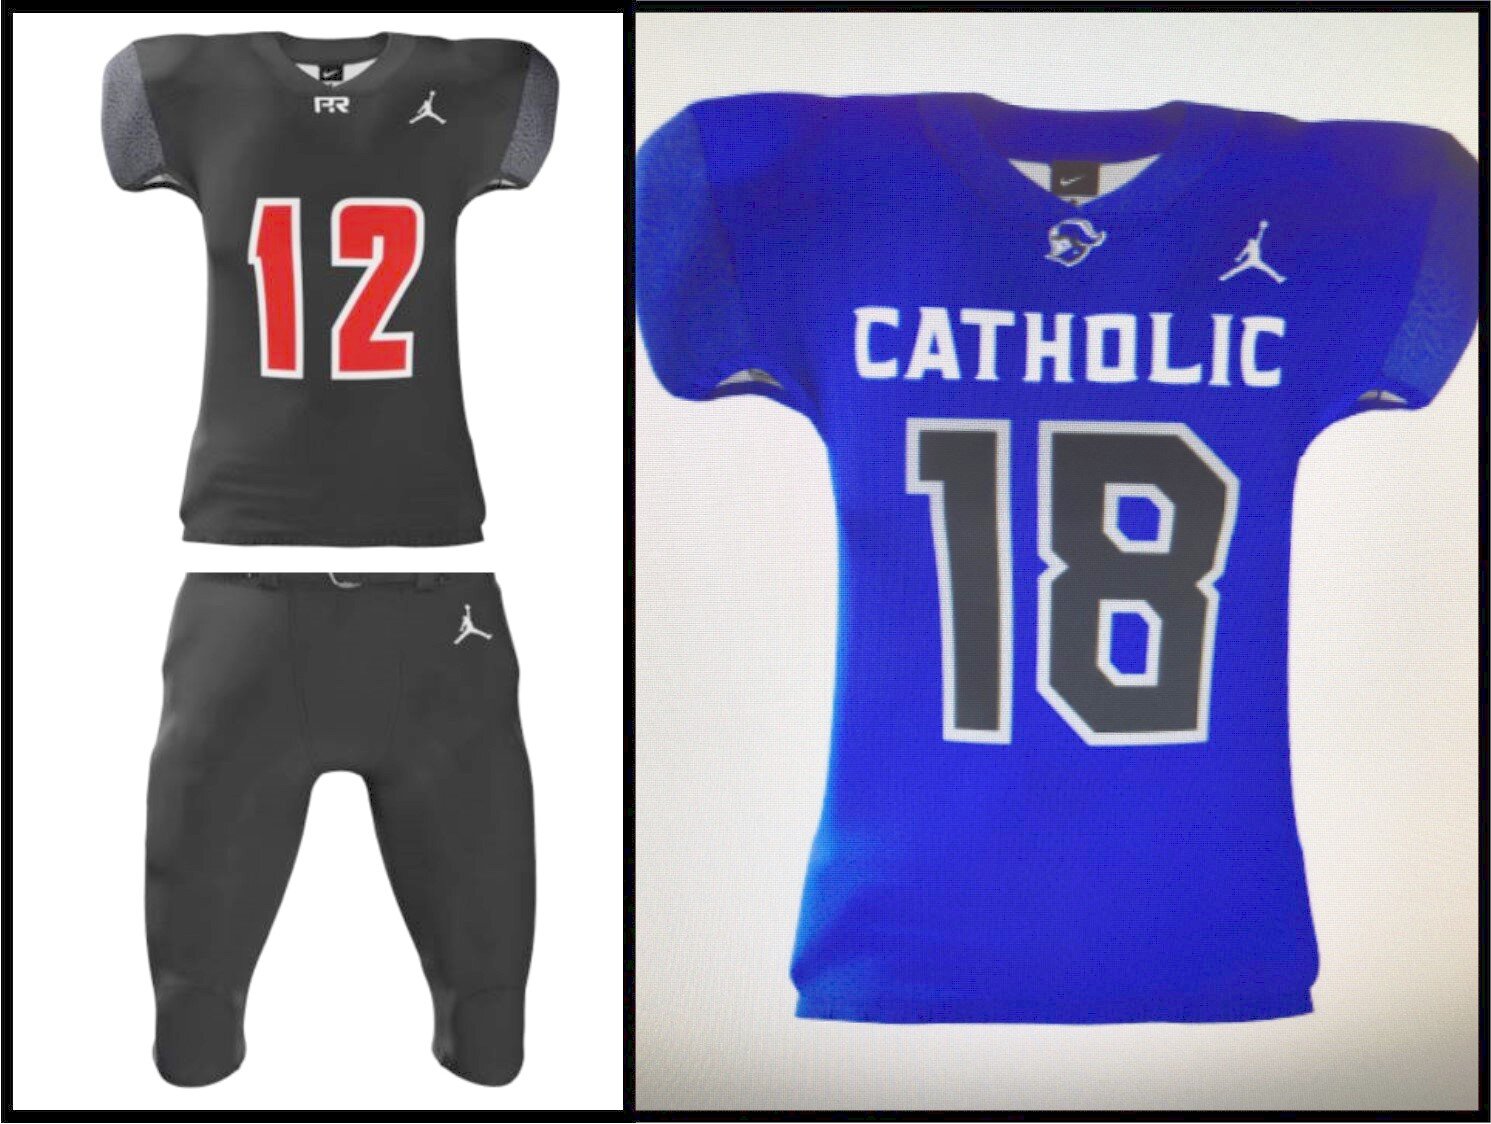 Local high schools get new threads for 